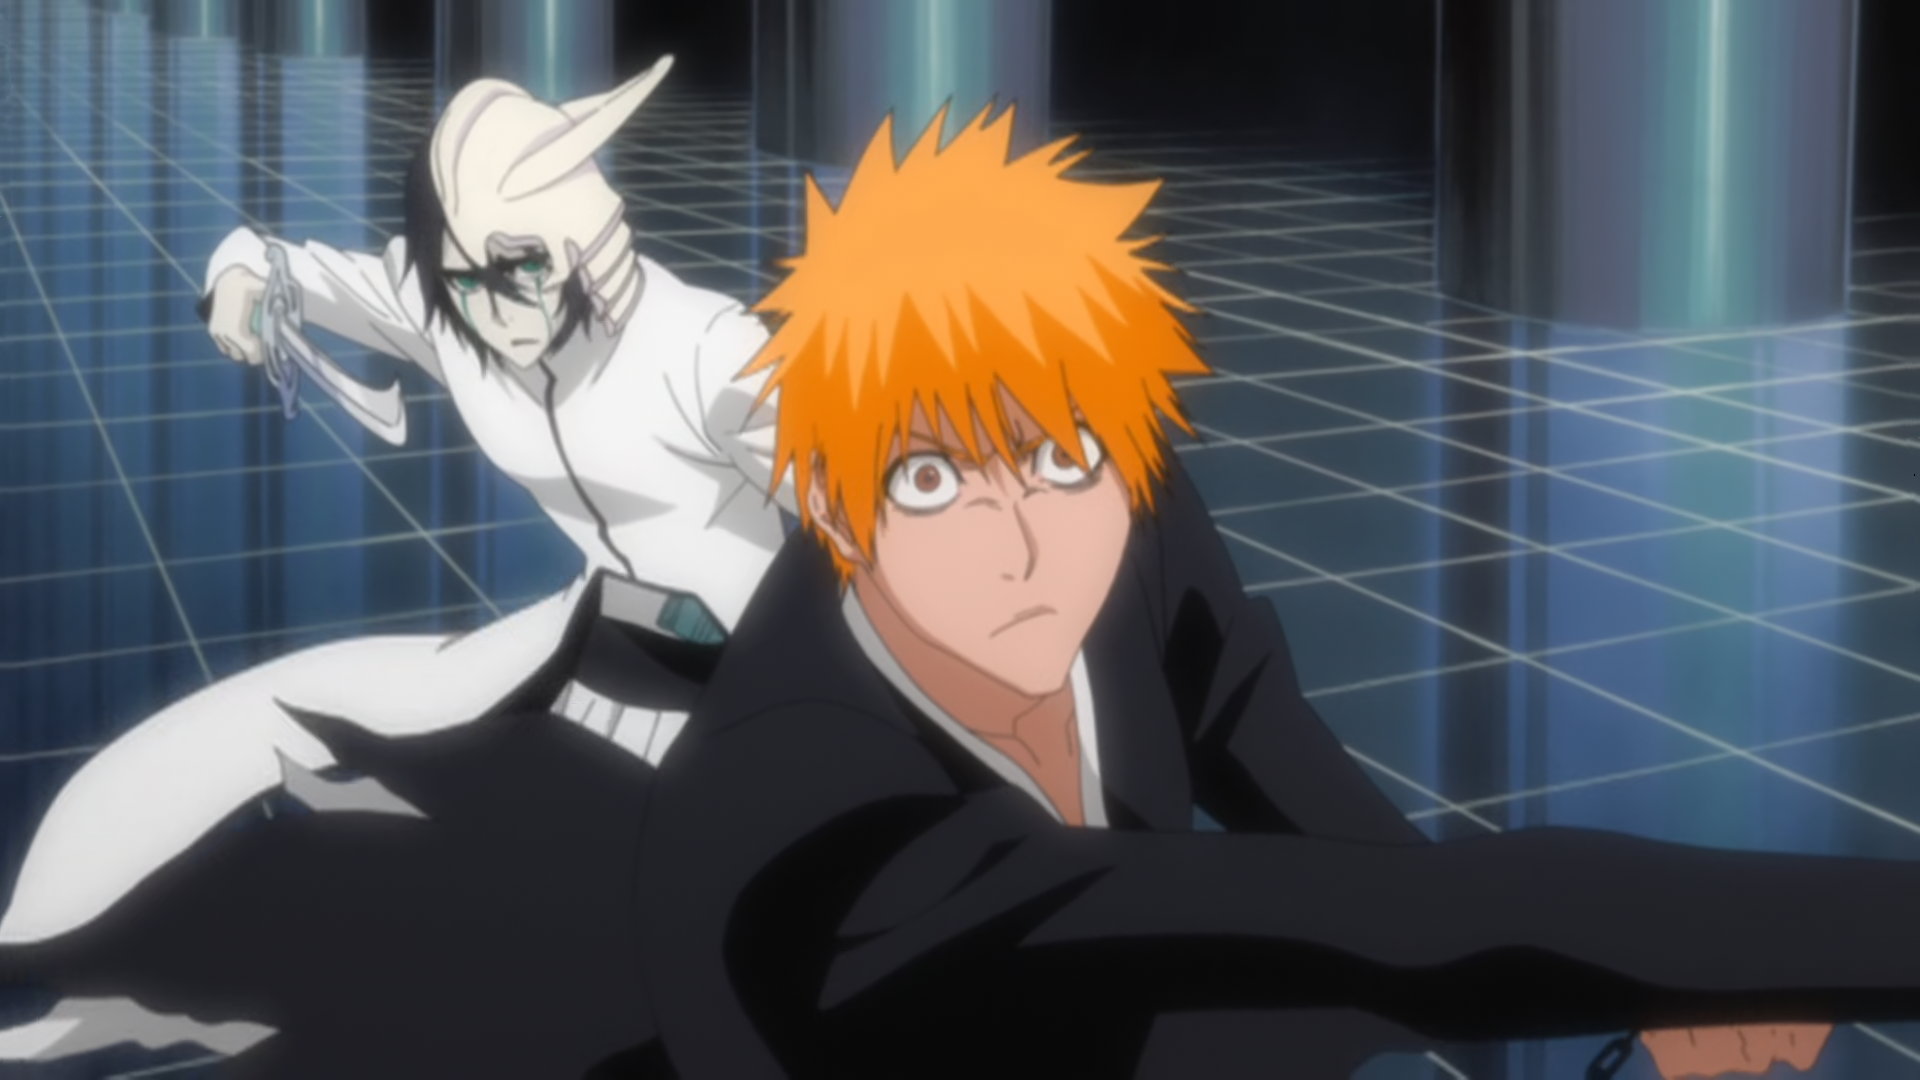 Connected Hearts! The Left Fist Prepared for Death! - Bleach Wiki ...